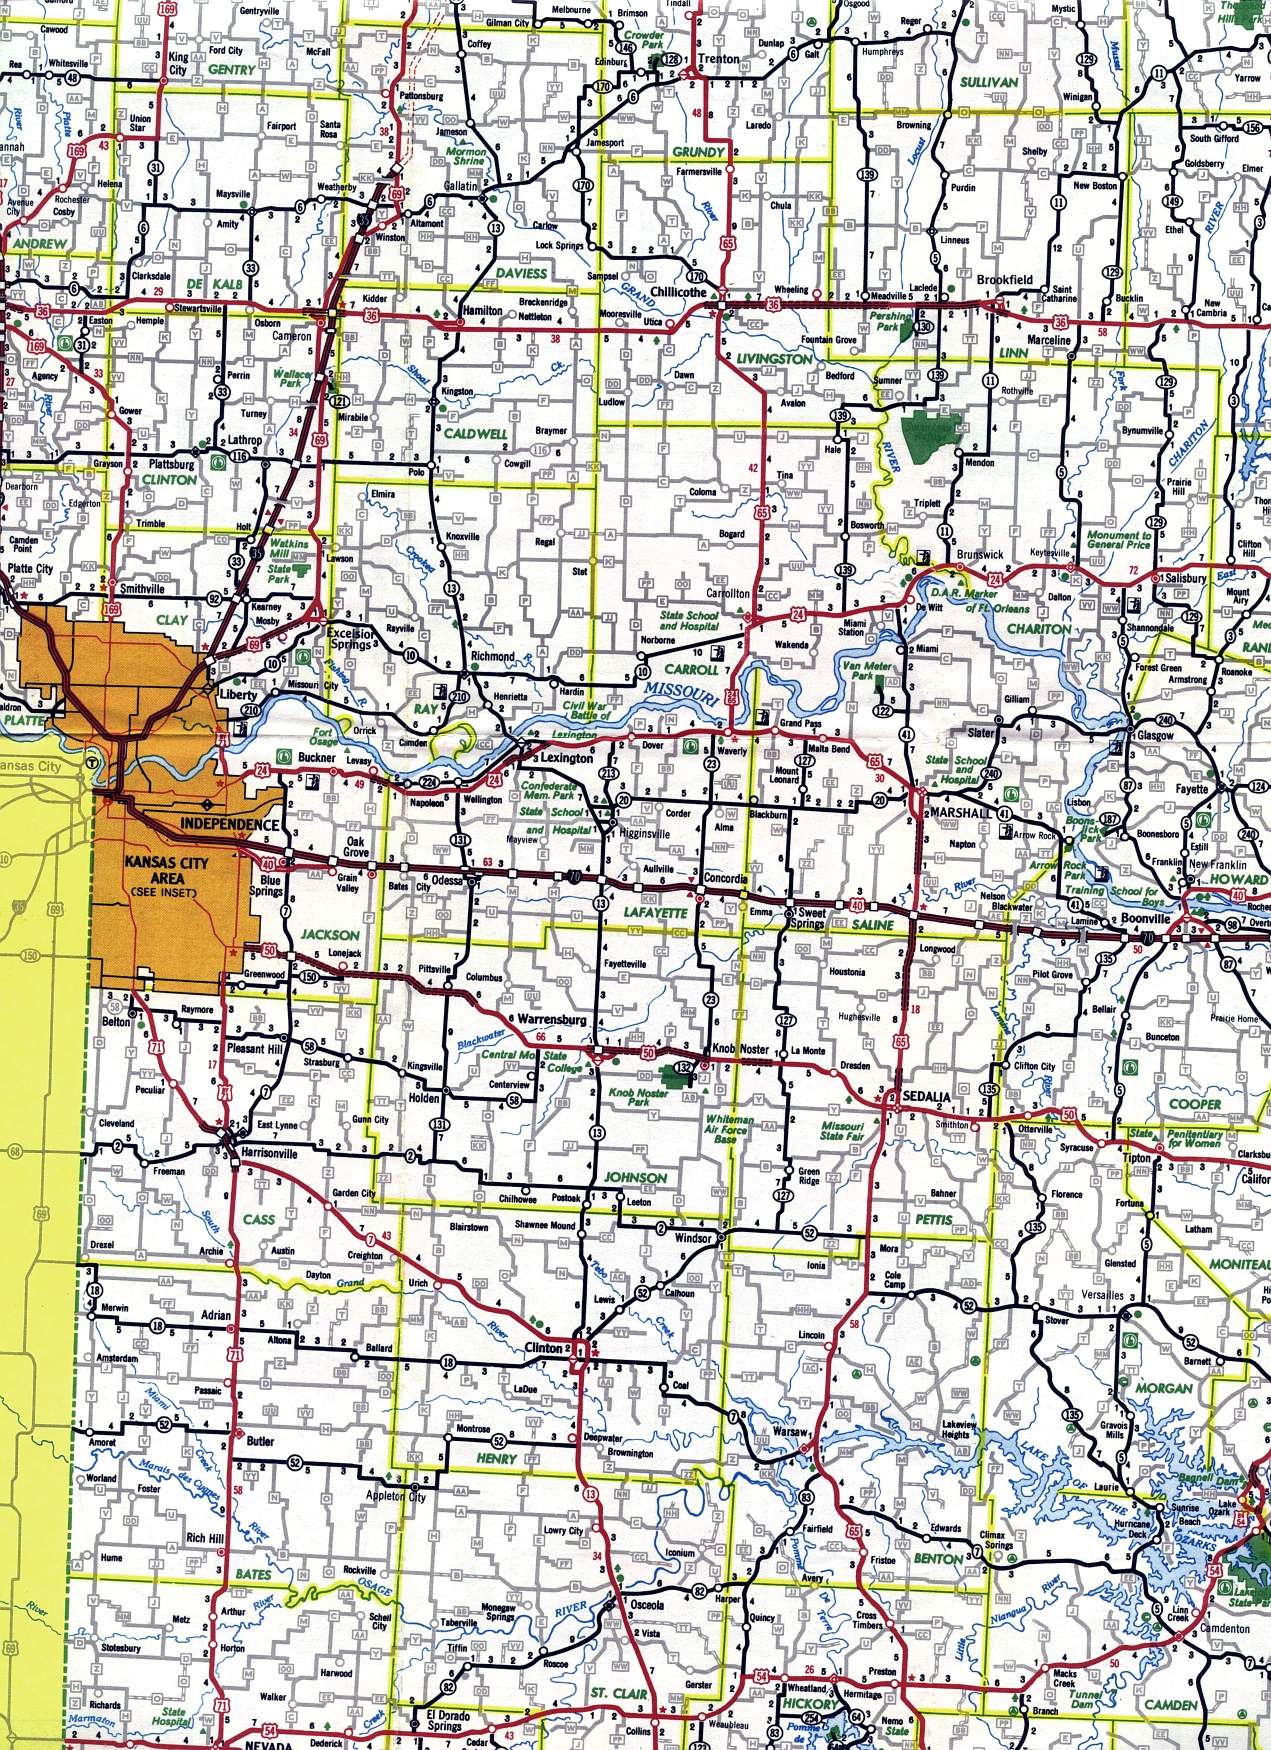 West-central section of Missouri from 1969 official highway map